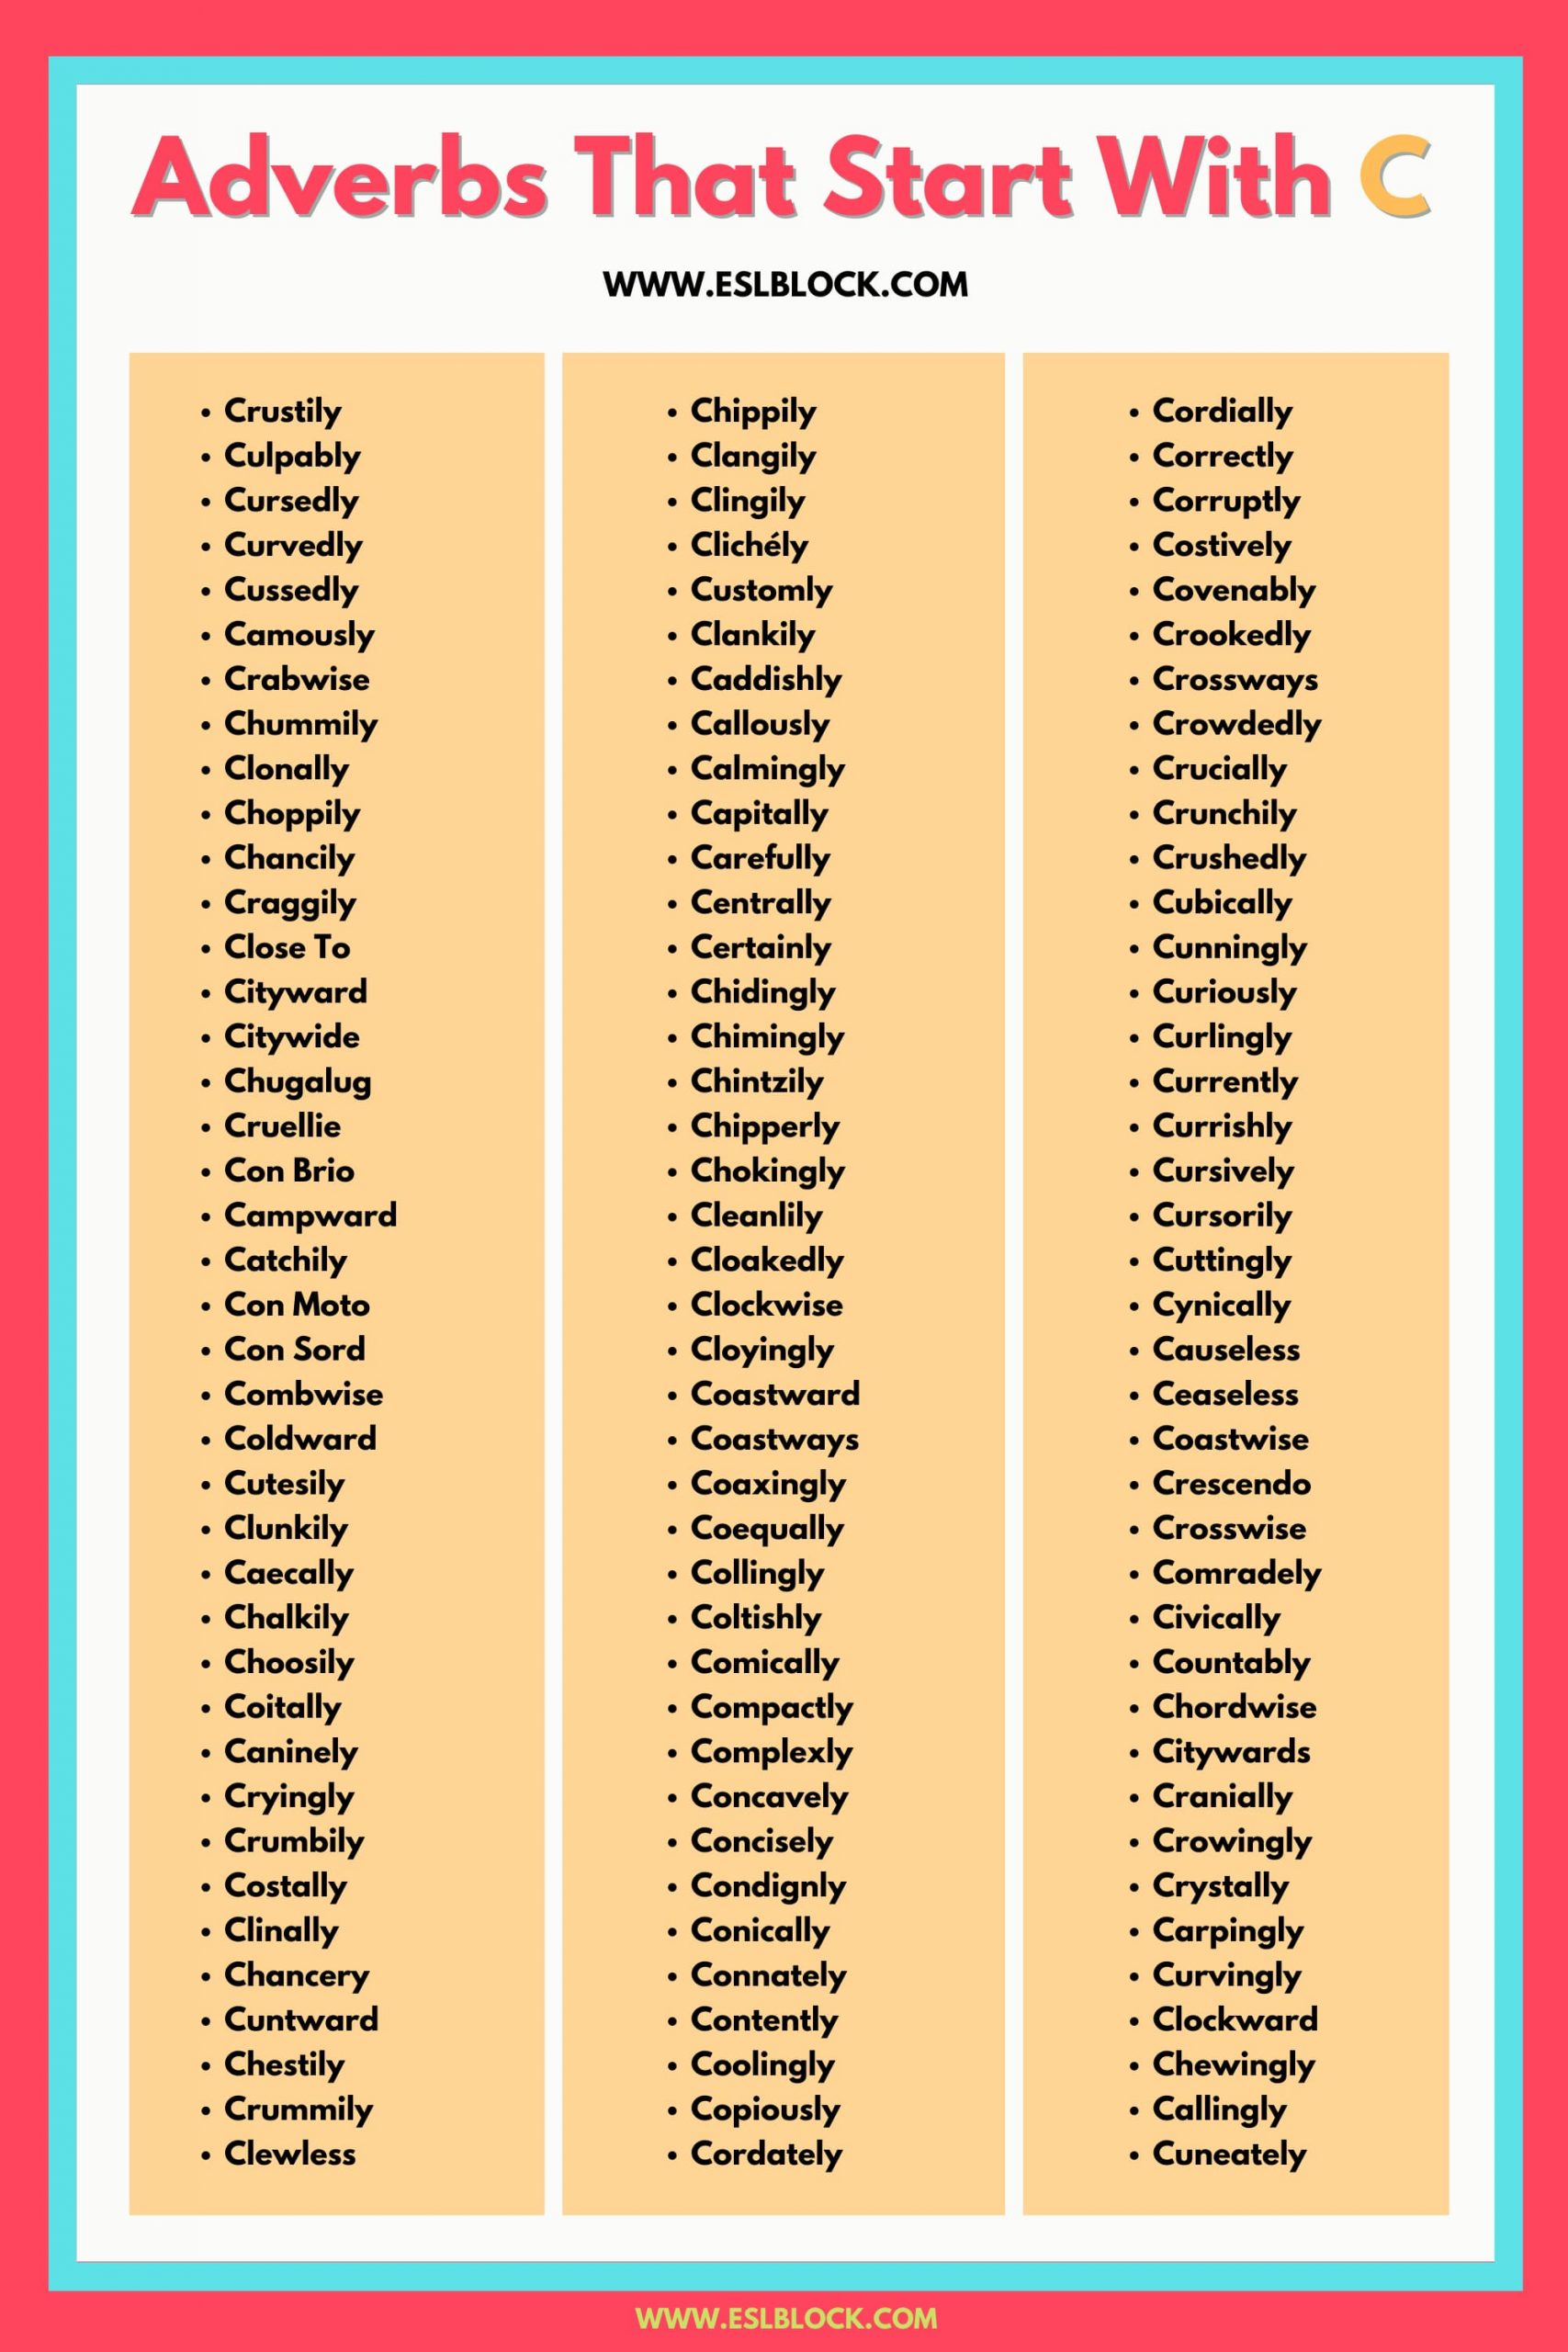 100 Example Sentences Using Adverbs, 4 Letter Adverbs That Start with C, 4 Letter Words, 5 Letter Adverbs That Start with C, 5 Letter Words, 6 Letter Adverbs That Start with C, 6 Letter Words, A to Z Adverbs, AA Adverbs, Adverb vocabulary words, Adverbs, Adverbs That Start with C, Adverbs with Example Sentences, All Adverbs, Types of Adverbs, Types of Adverbs with Example Sentences, Vocabulary, What are Adverbs, What are the types of Adverbs, Words That with C